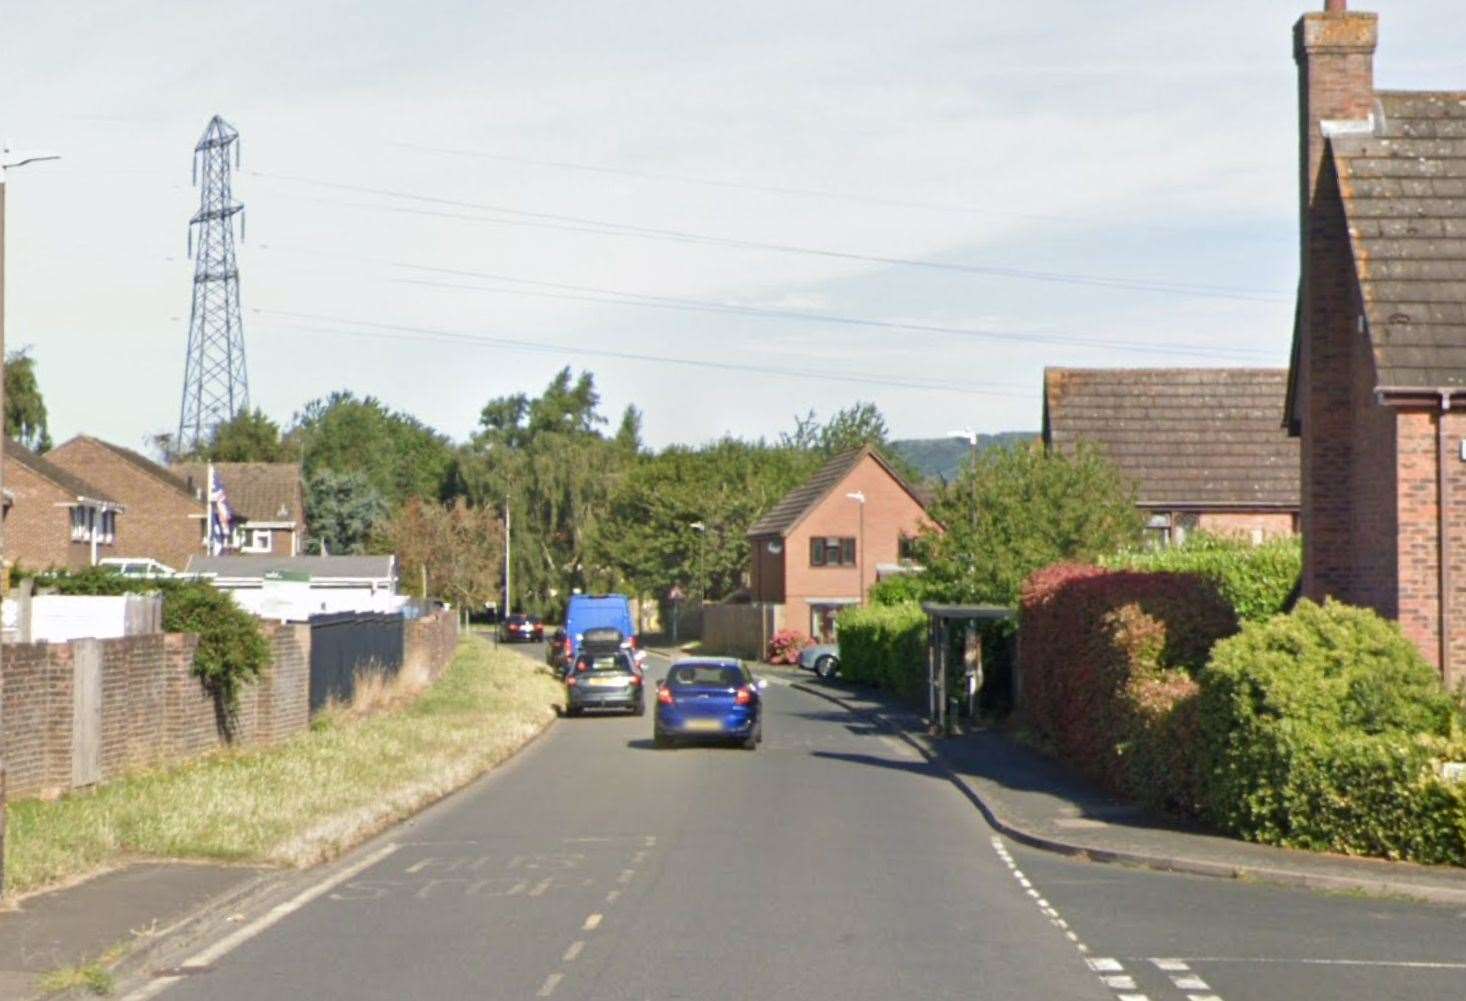 A man was reportedly bitten by a dog in Chaucer Way, Larkfield. Picture: Google